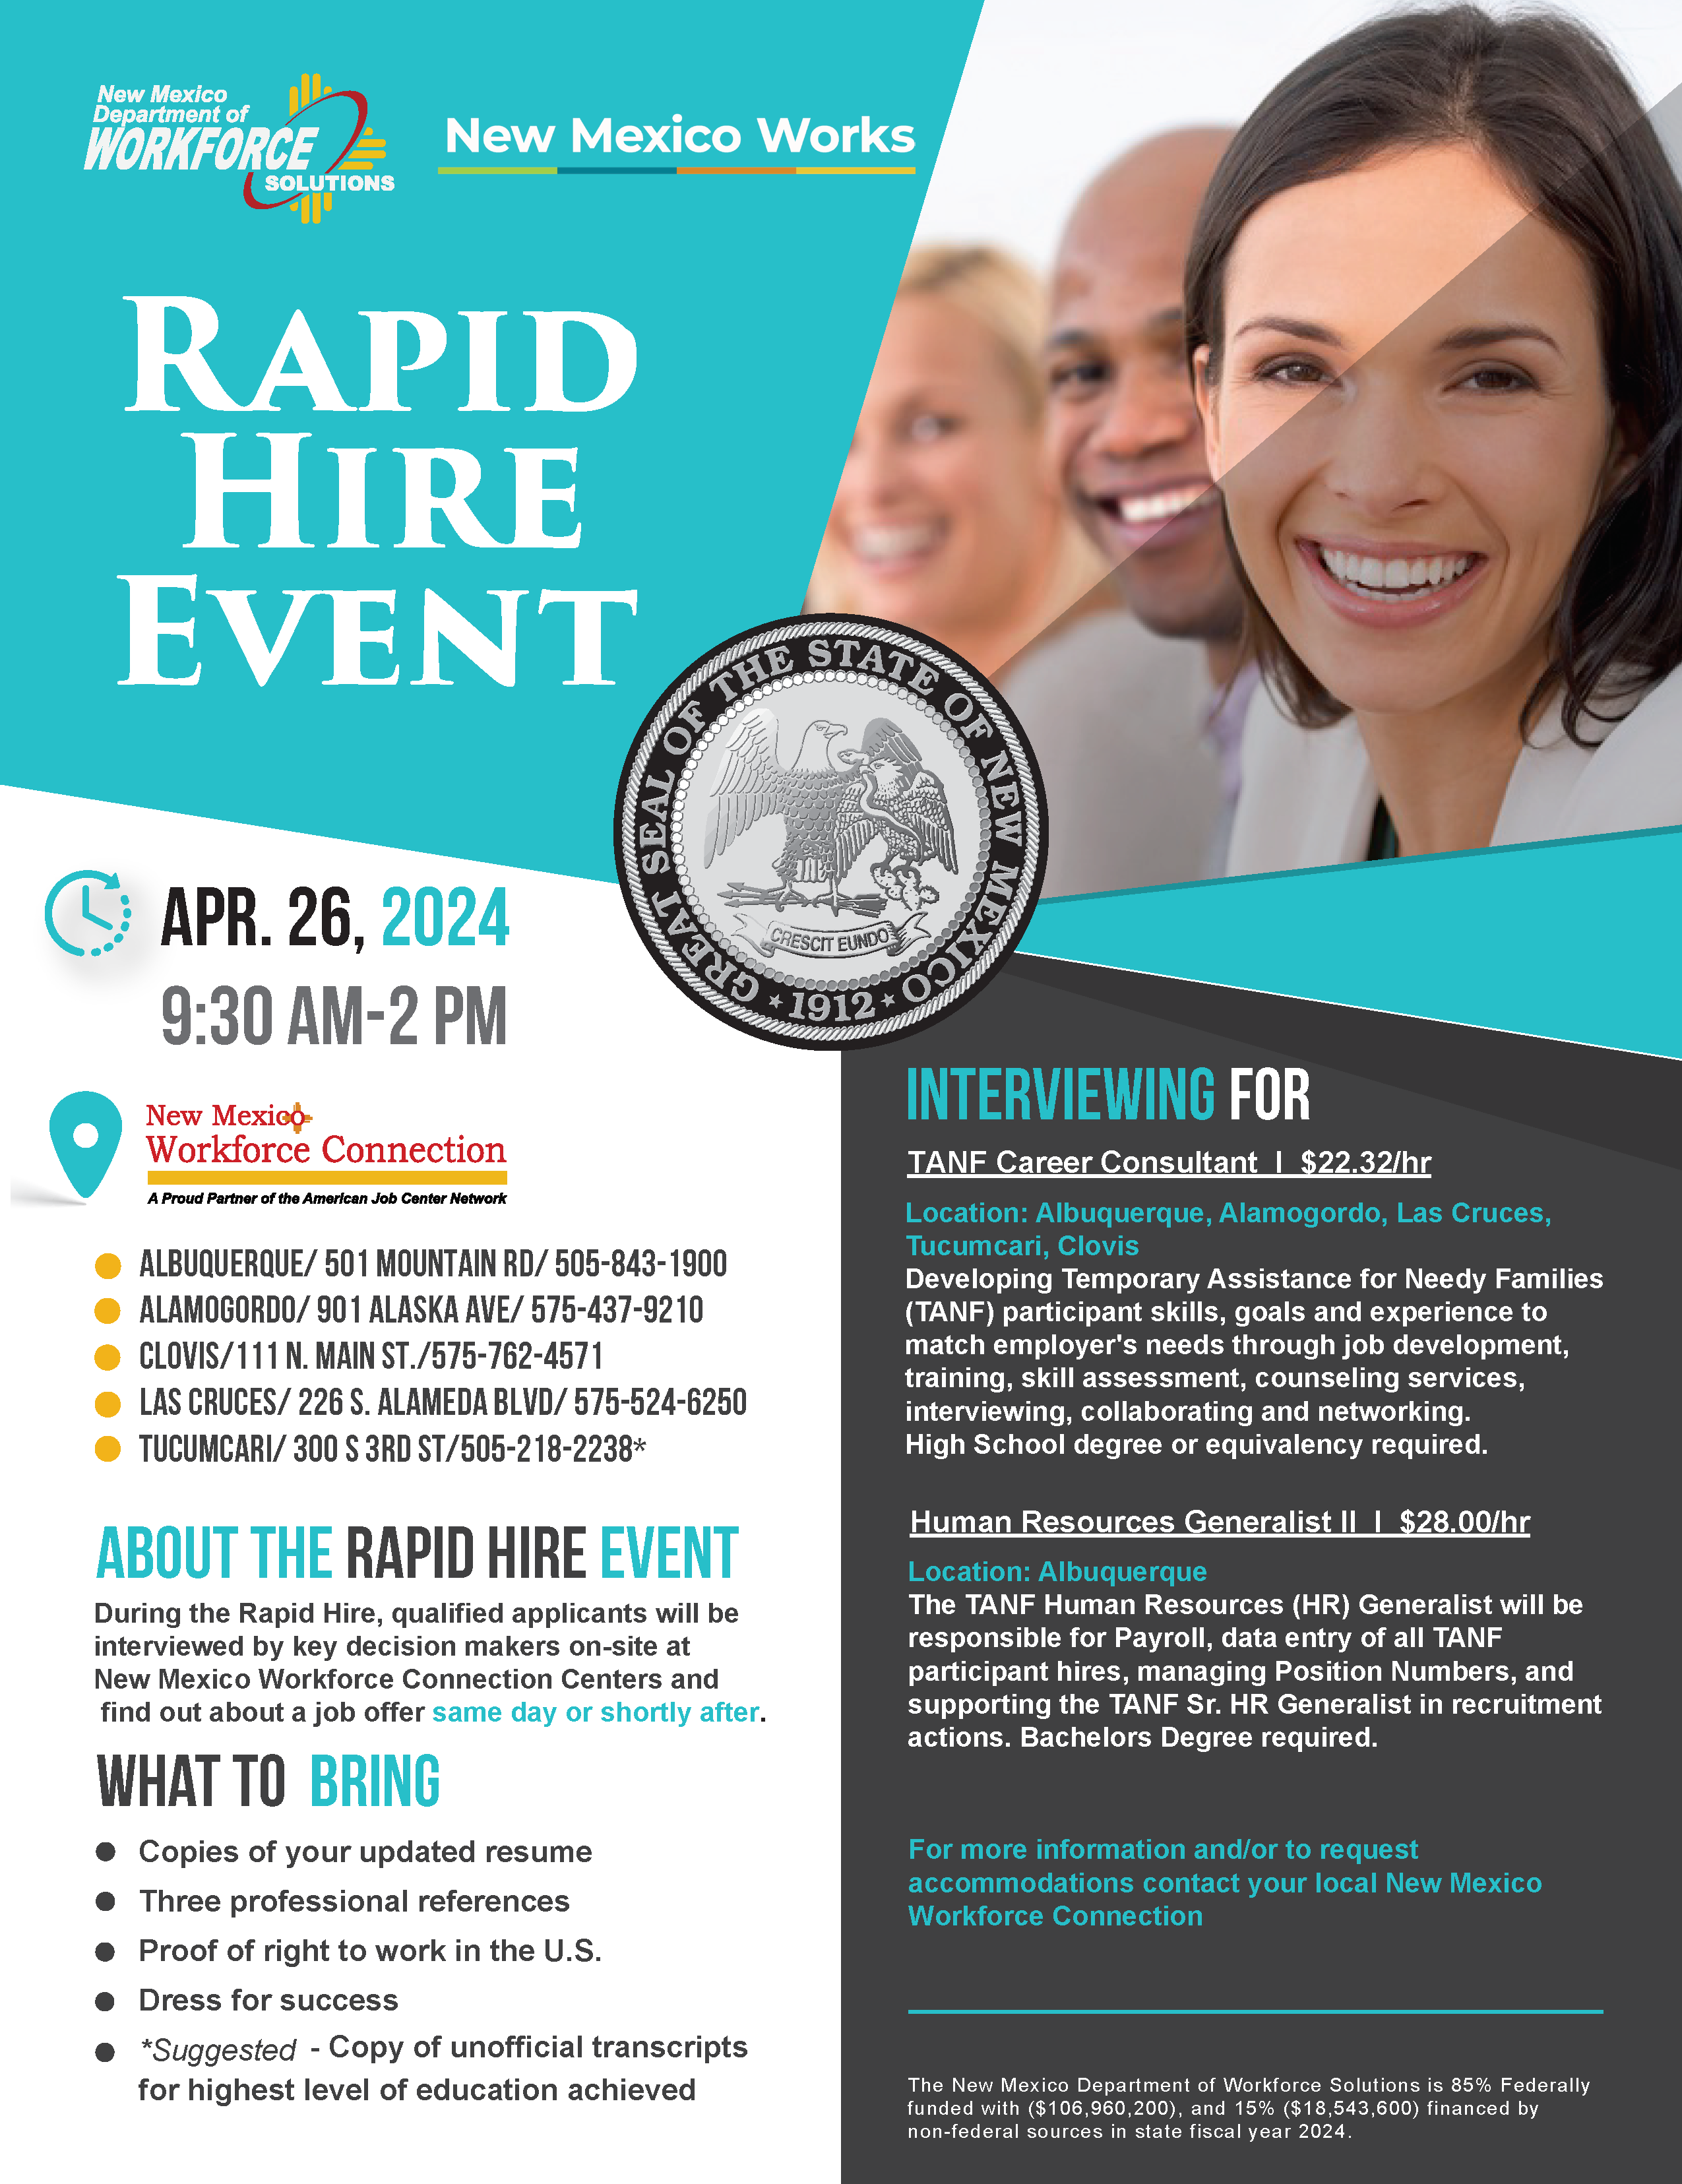 New Mexico Department of Workforce Solutions Rapid Hire Event Flyer